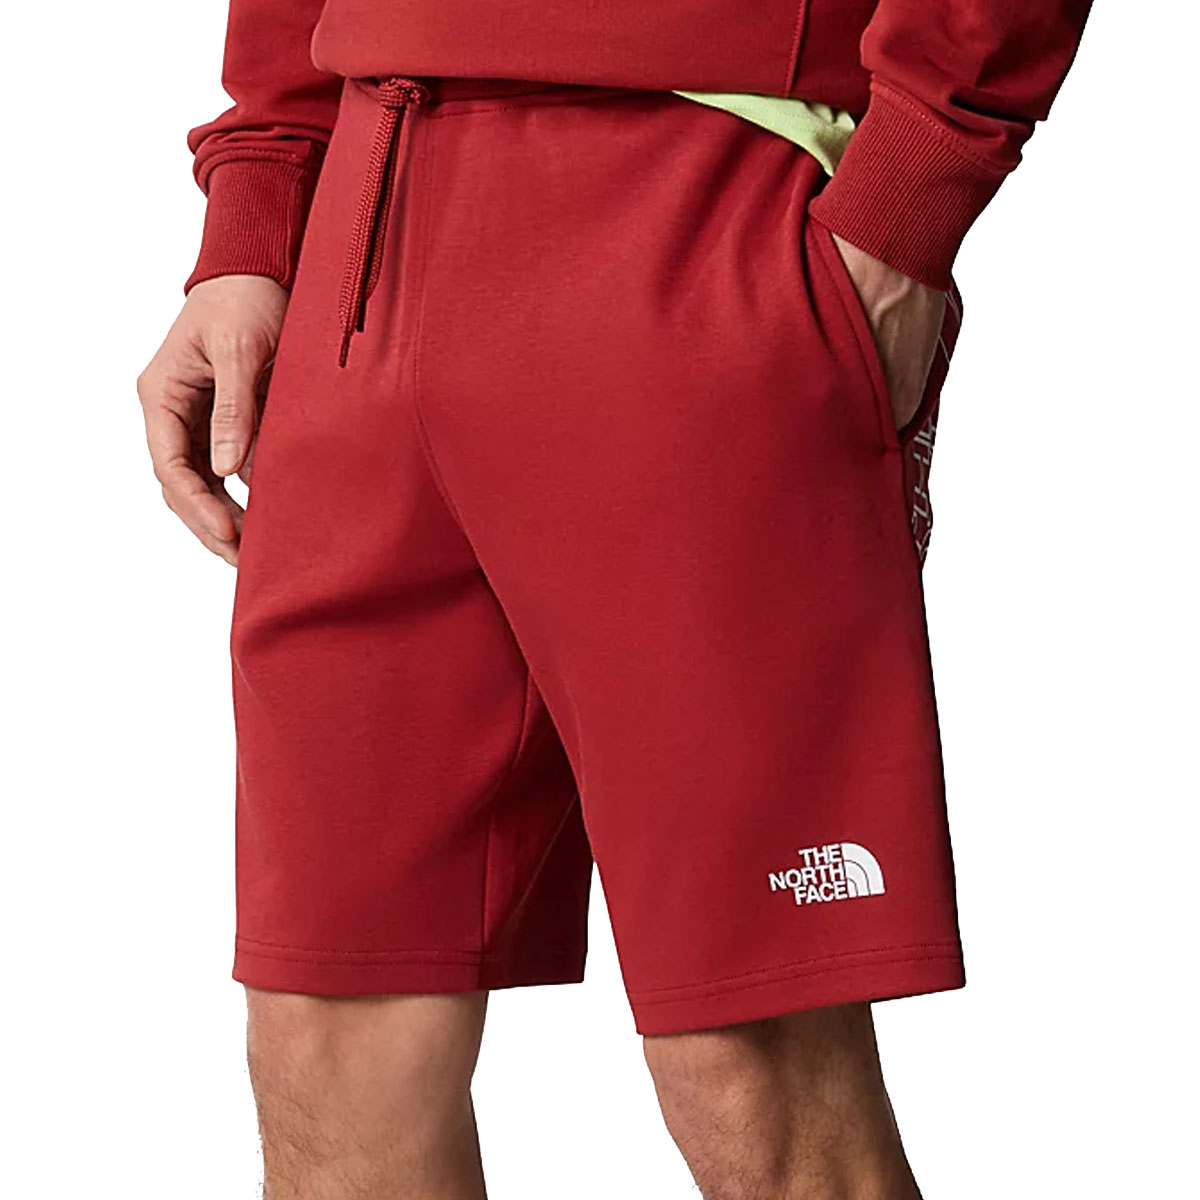 THE NORTH FACE - GRAPHIC LIGHT SHORTS